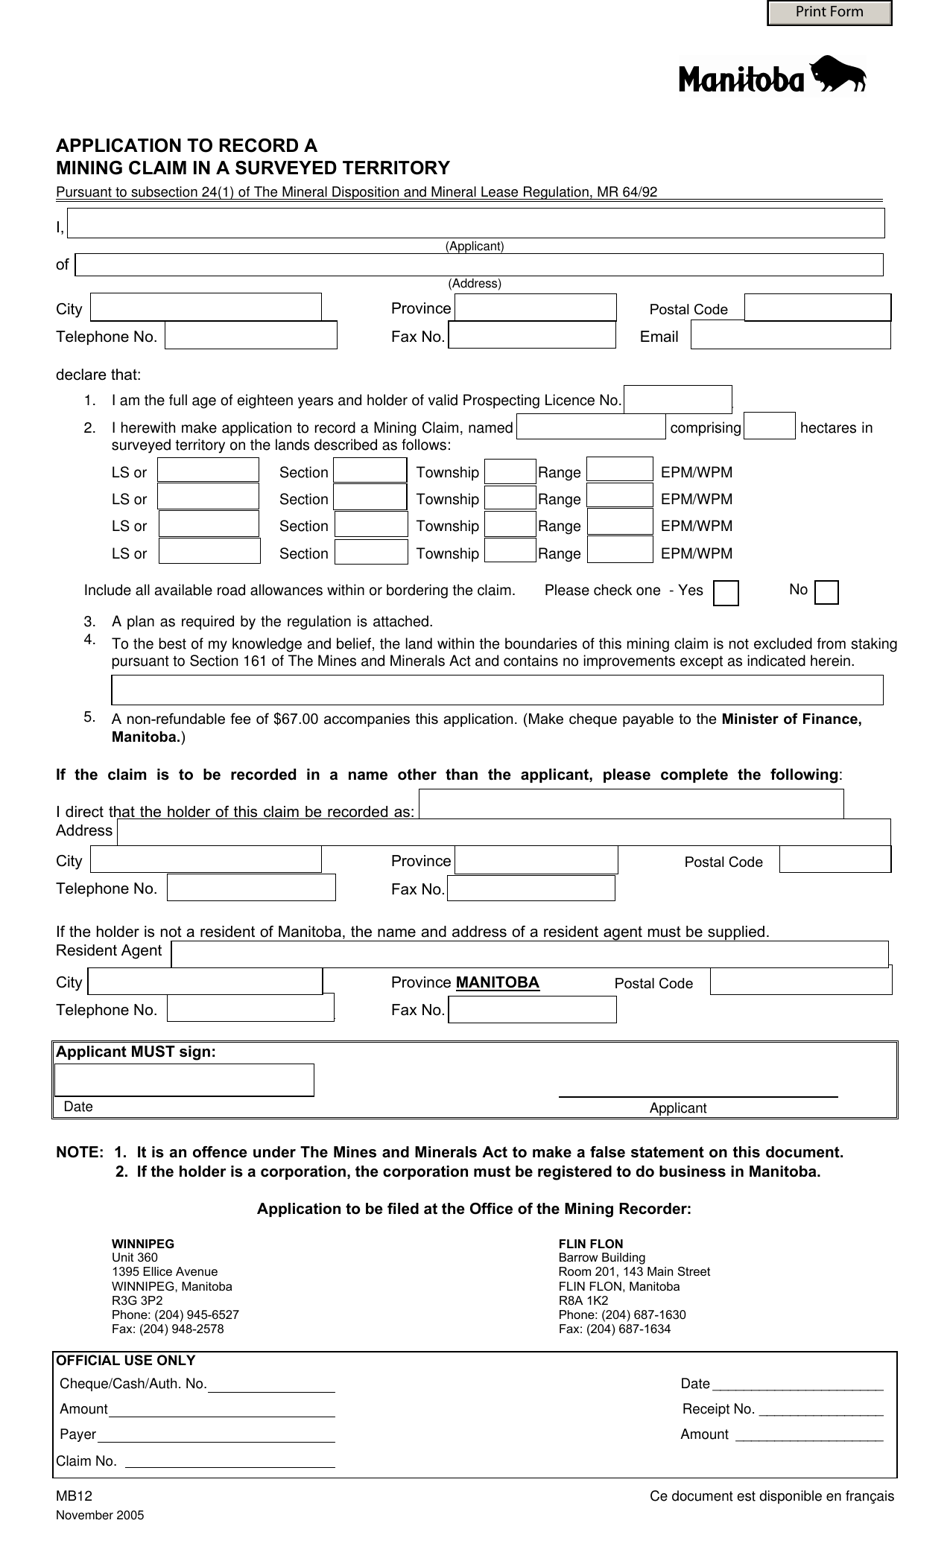 Form MB12 Application to Record a Mining Claim in a Surveyed Territory - Manitoba, Canada, Page 1